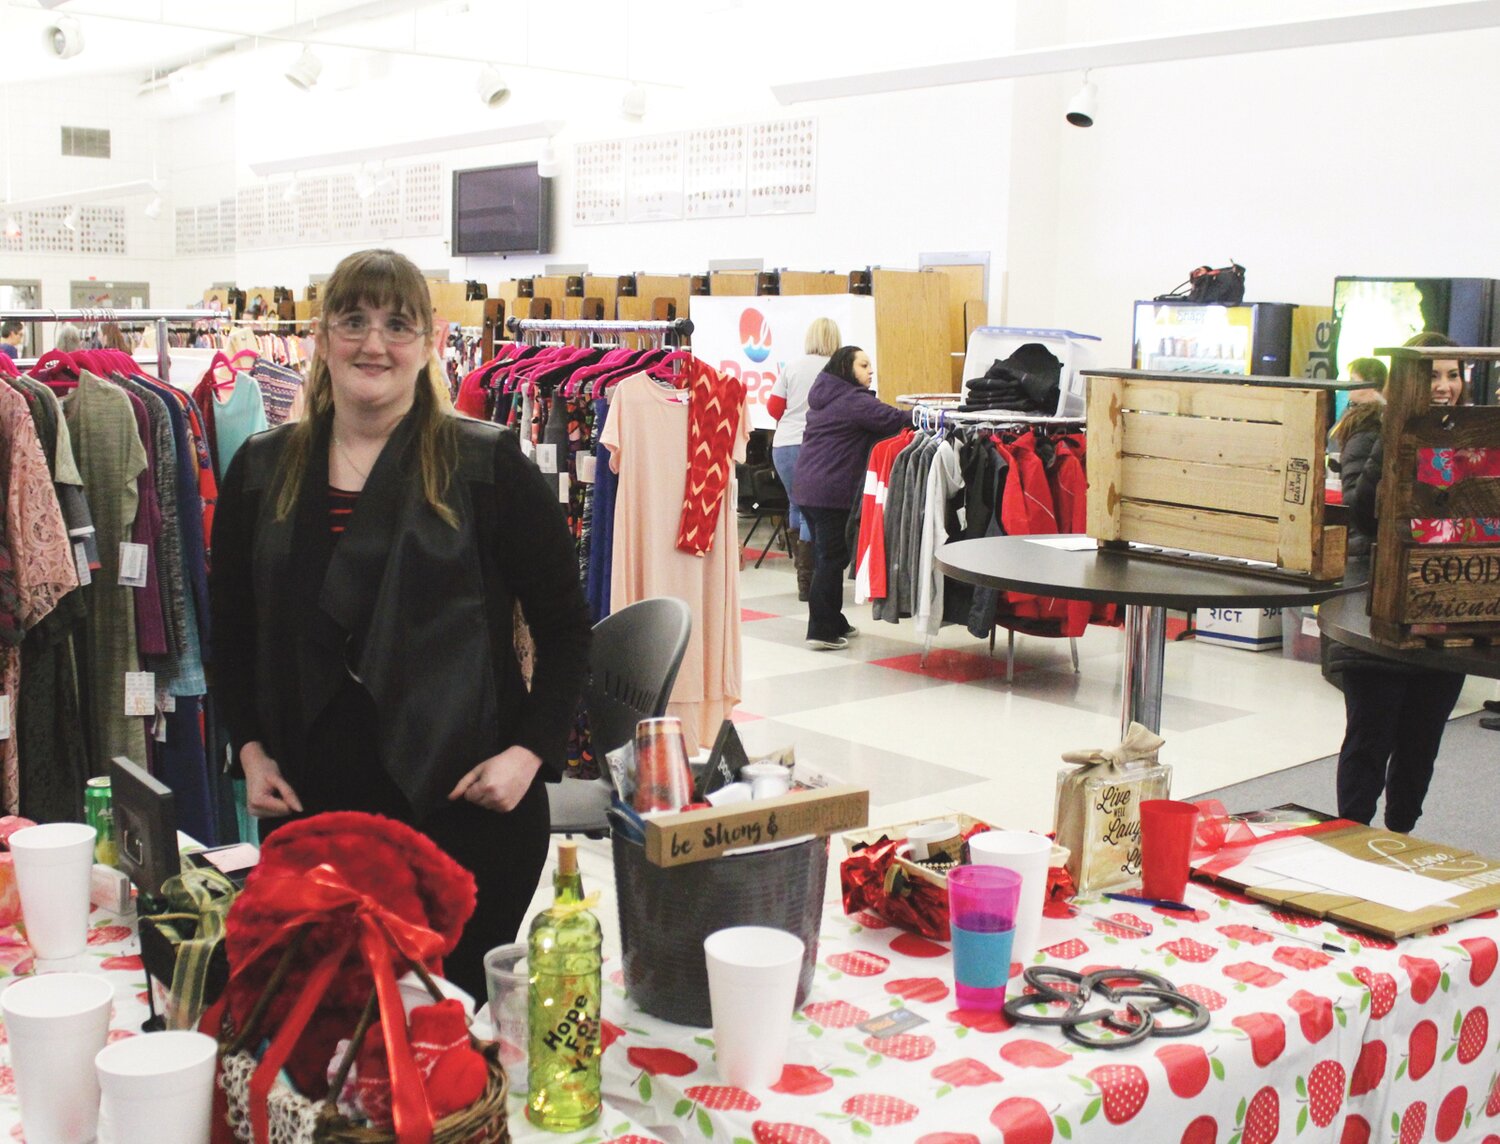 Jamie Descoteaux, a nurse practitioner at family Health Center and a Corona family friend, organized last Sunday’s fundraiser at the Brewster High School commons room. Vendors of clothing, crafts, food and other products can be seen in the background.